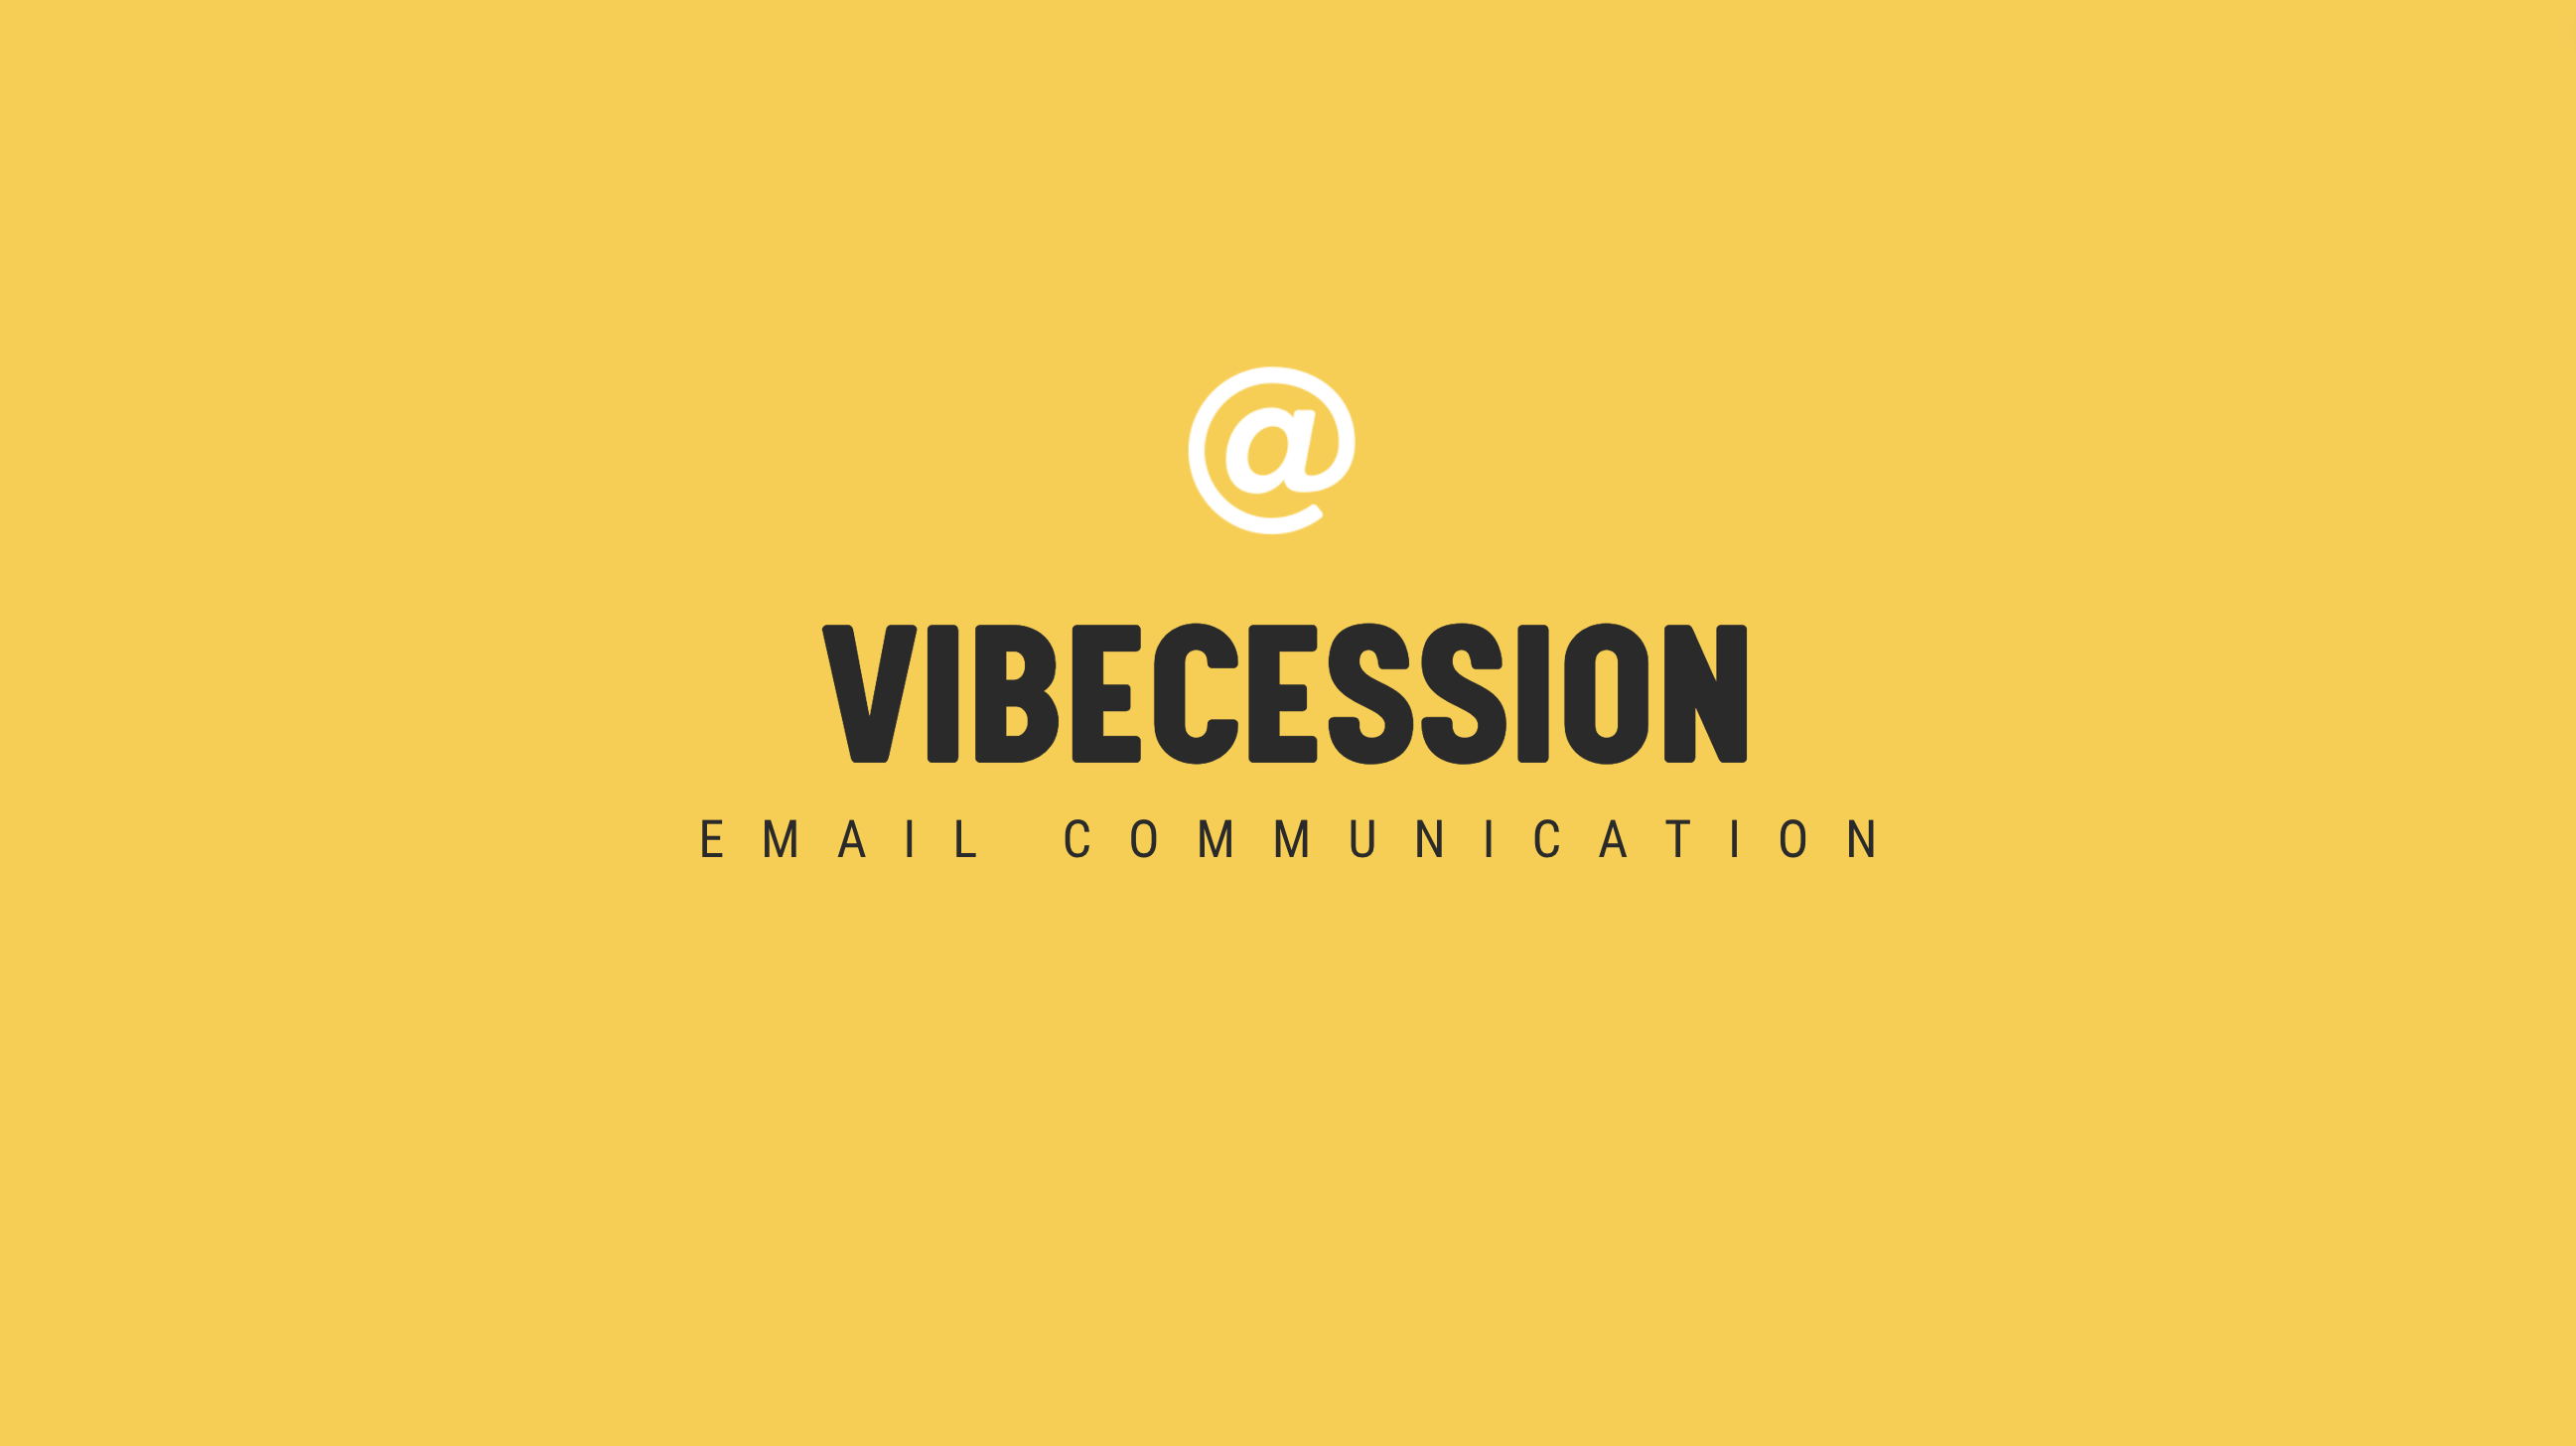 [NEW] Vibecession - Timely Email